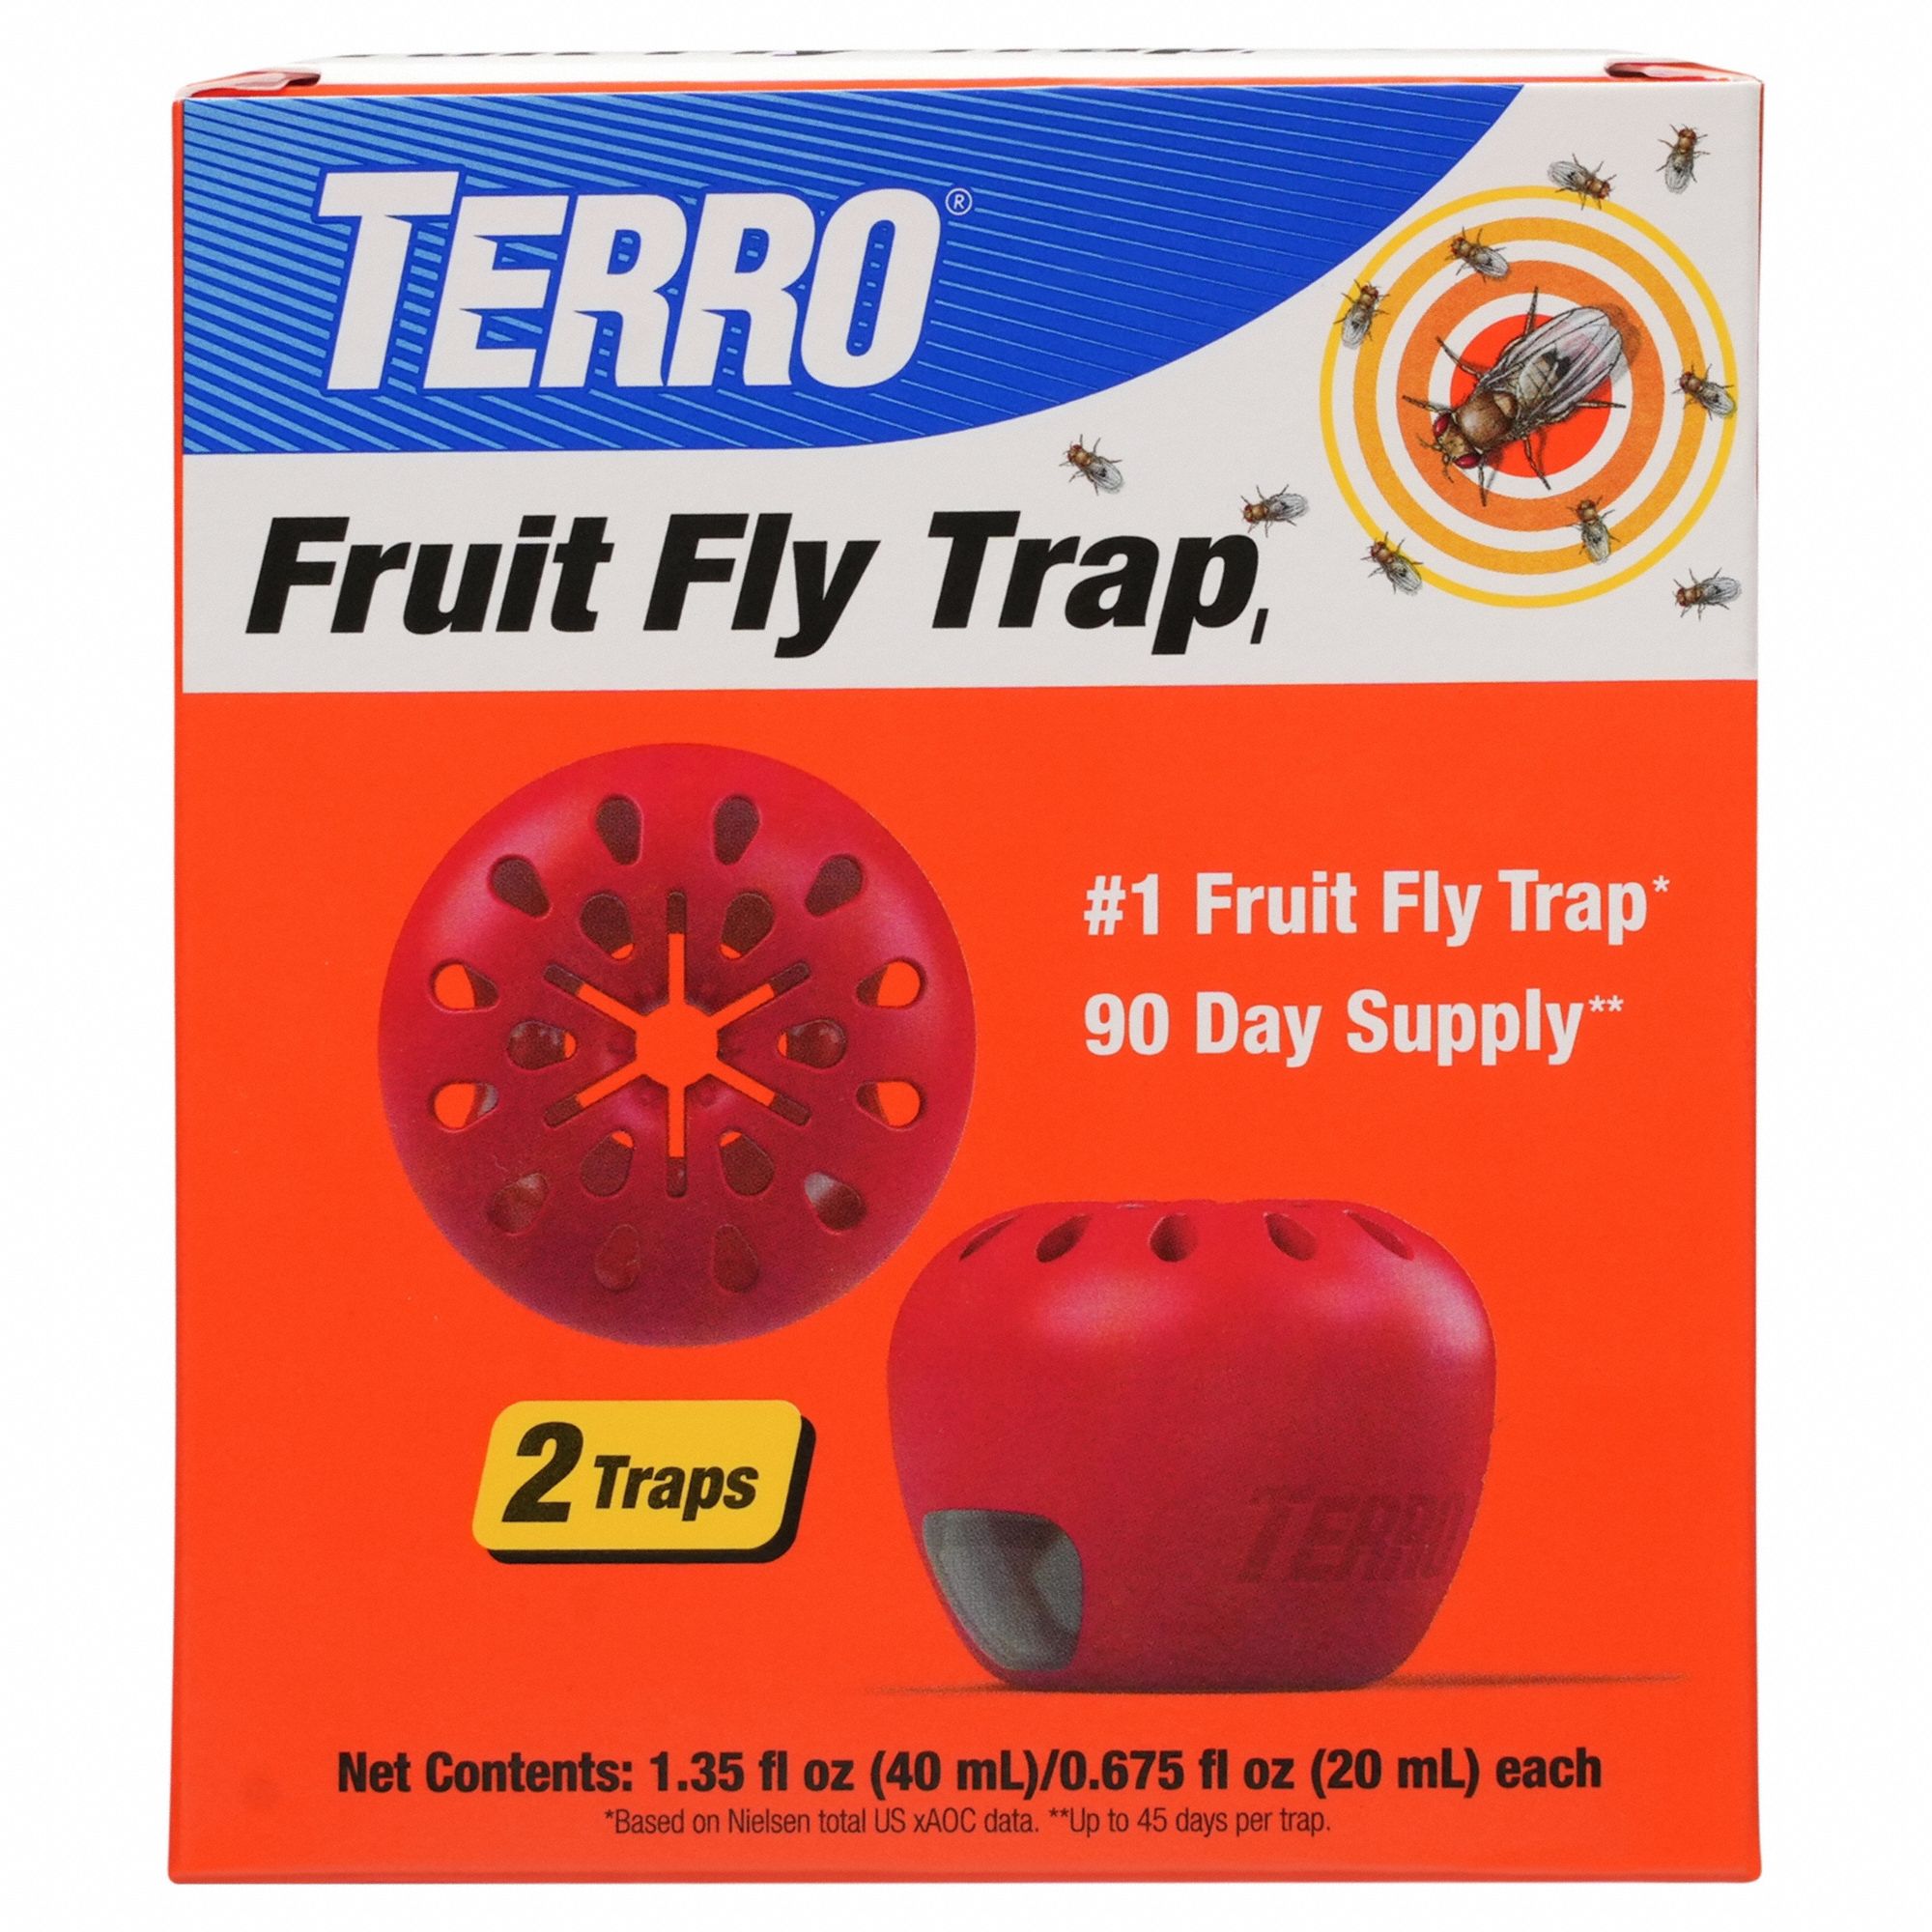 Fruit Fly Trap: For Use On Flying Insects, Bait Box Trap, Indoor Use, 2 PK